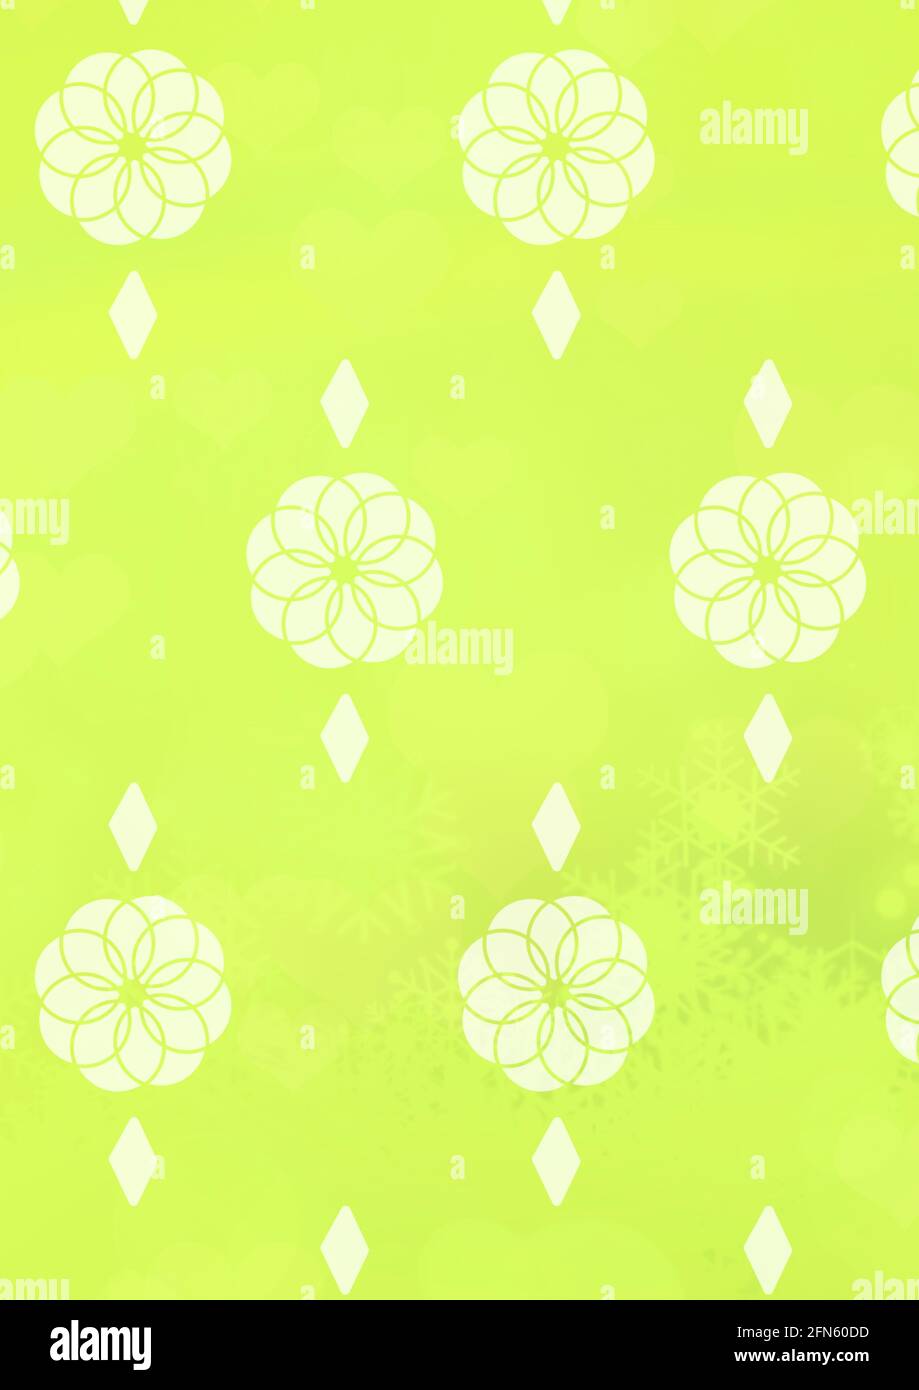 Composition of rows of white flowers on lime green background Stock Photo